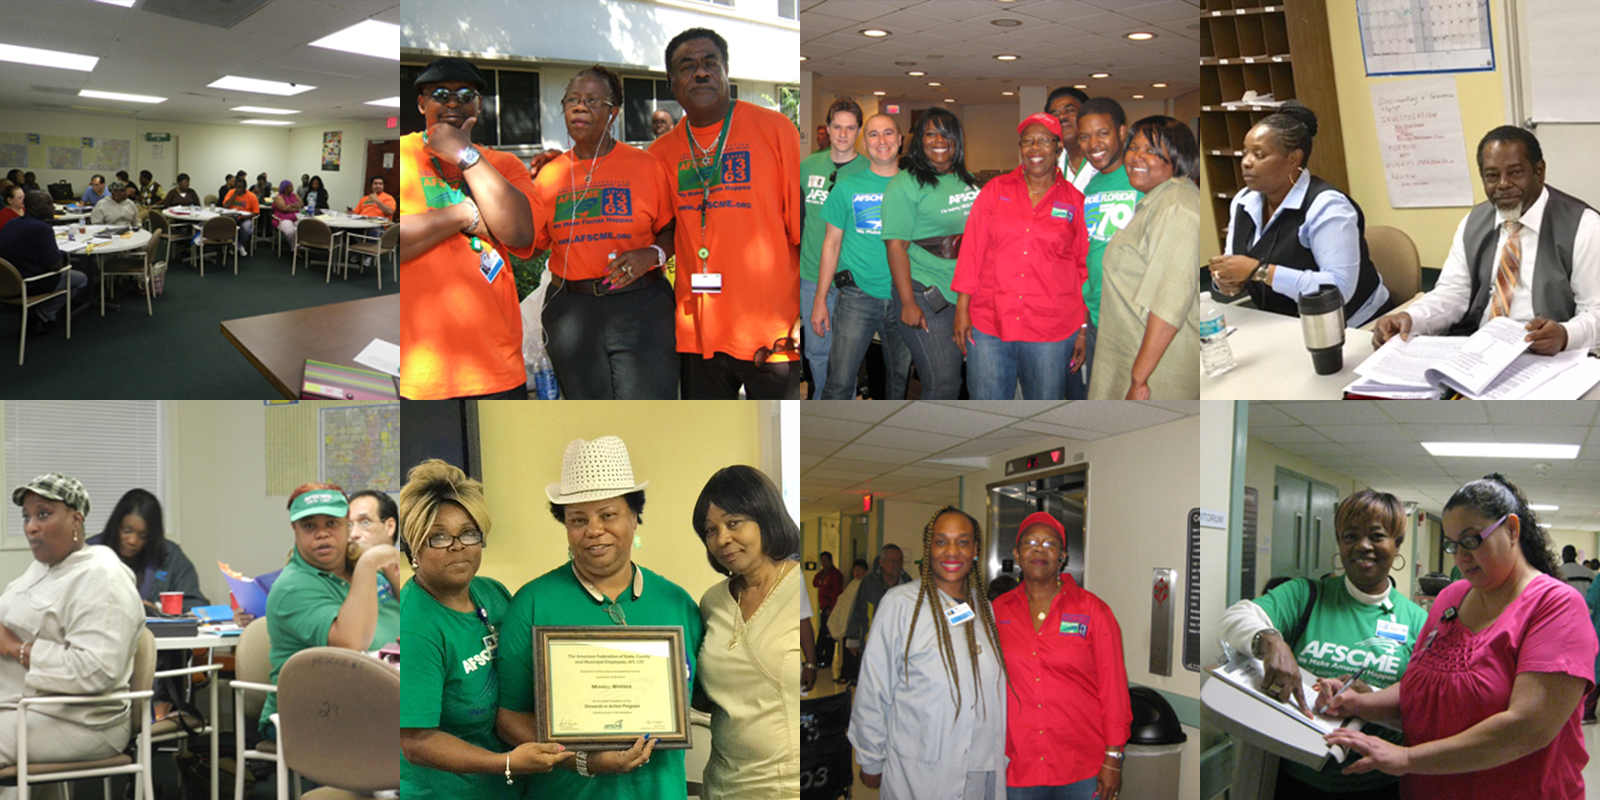 Grid of photos of members of AFSCME Local 1363 organizing